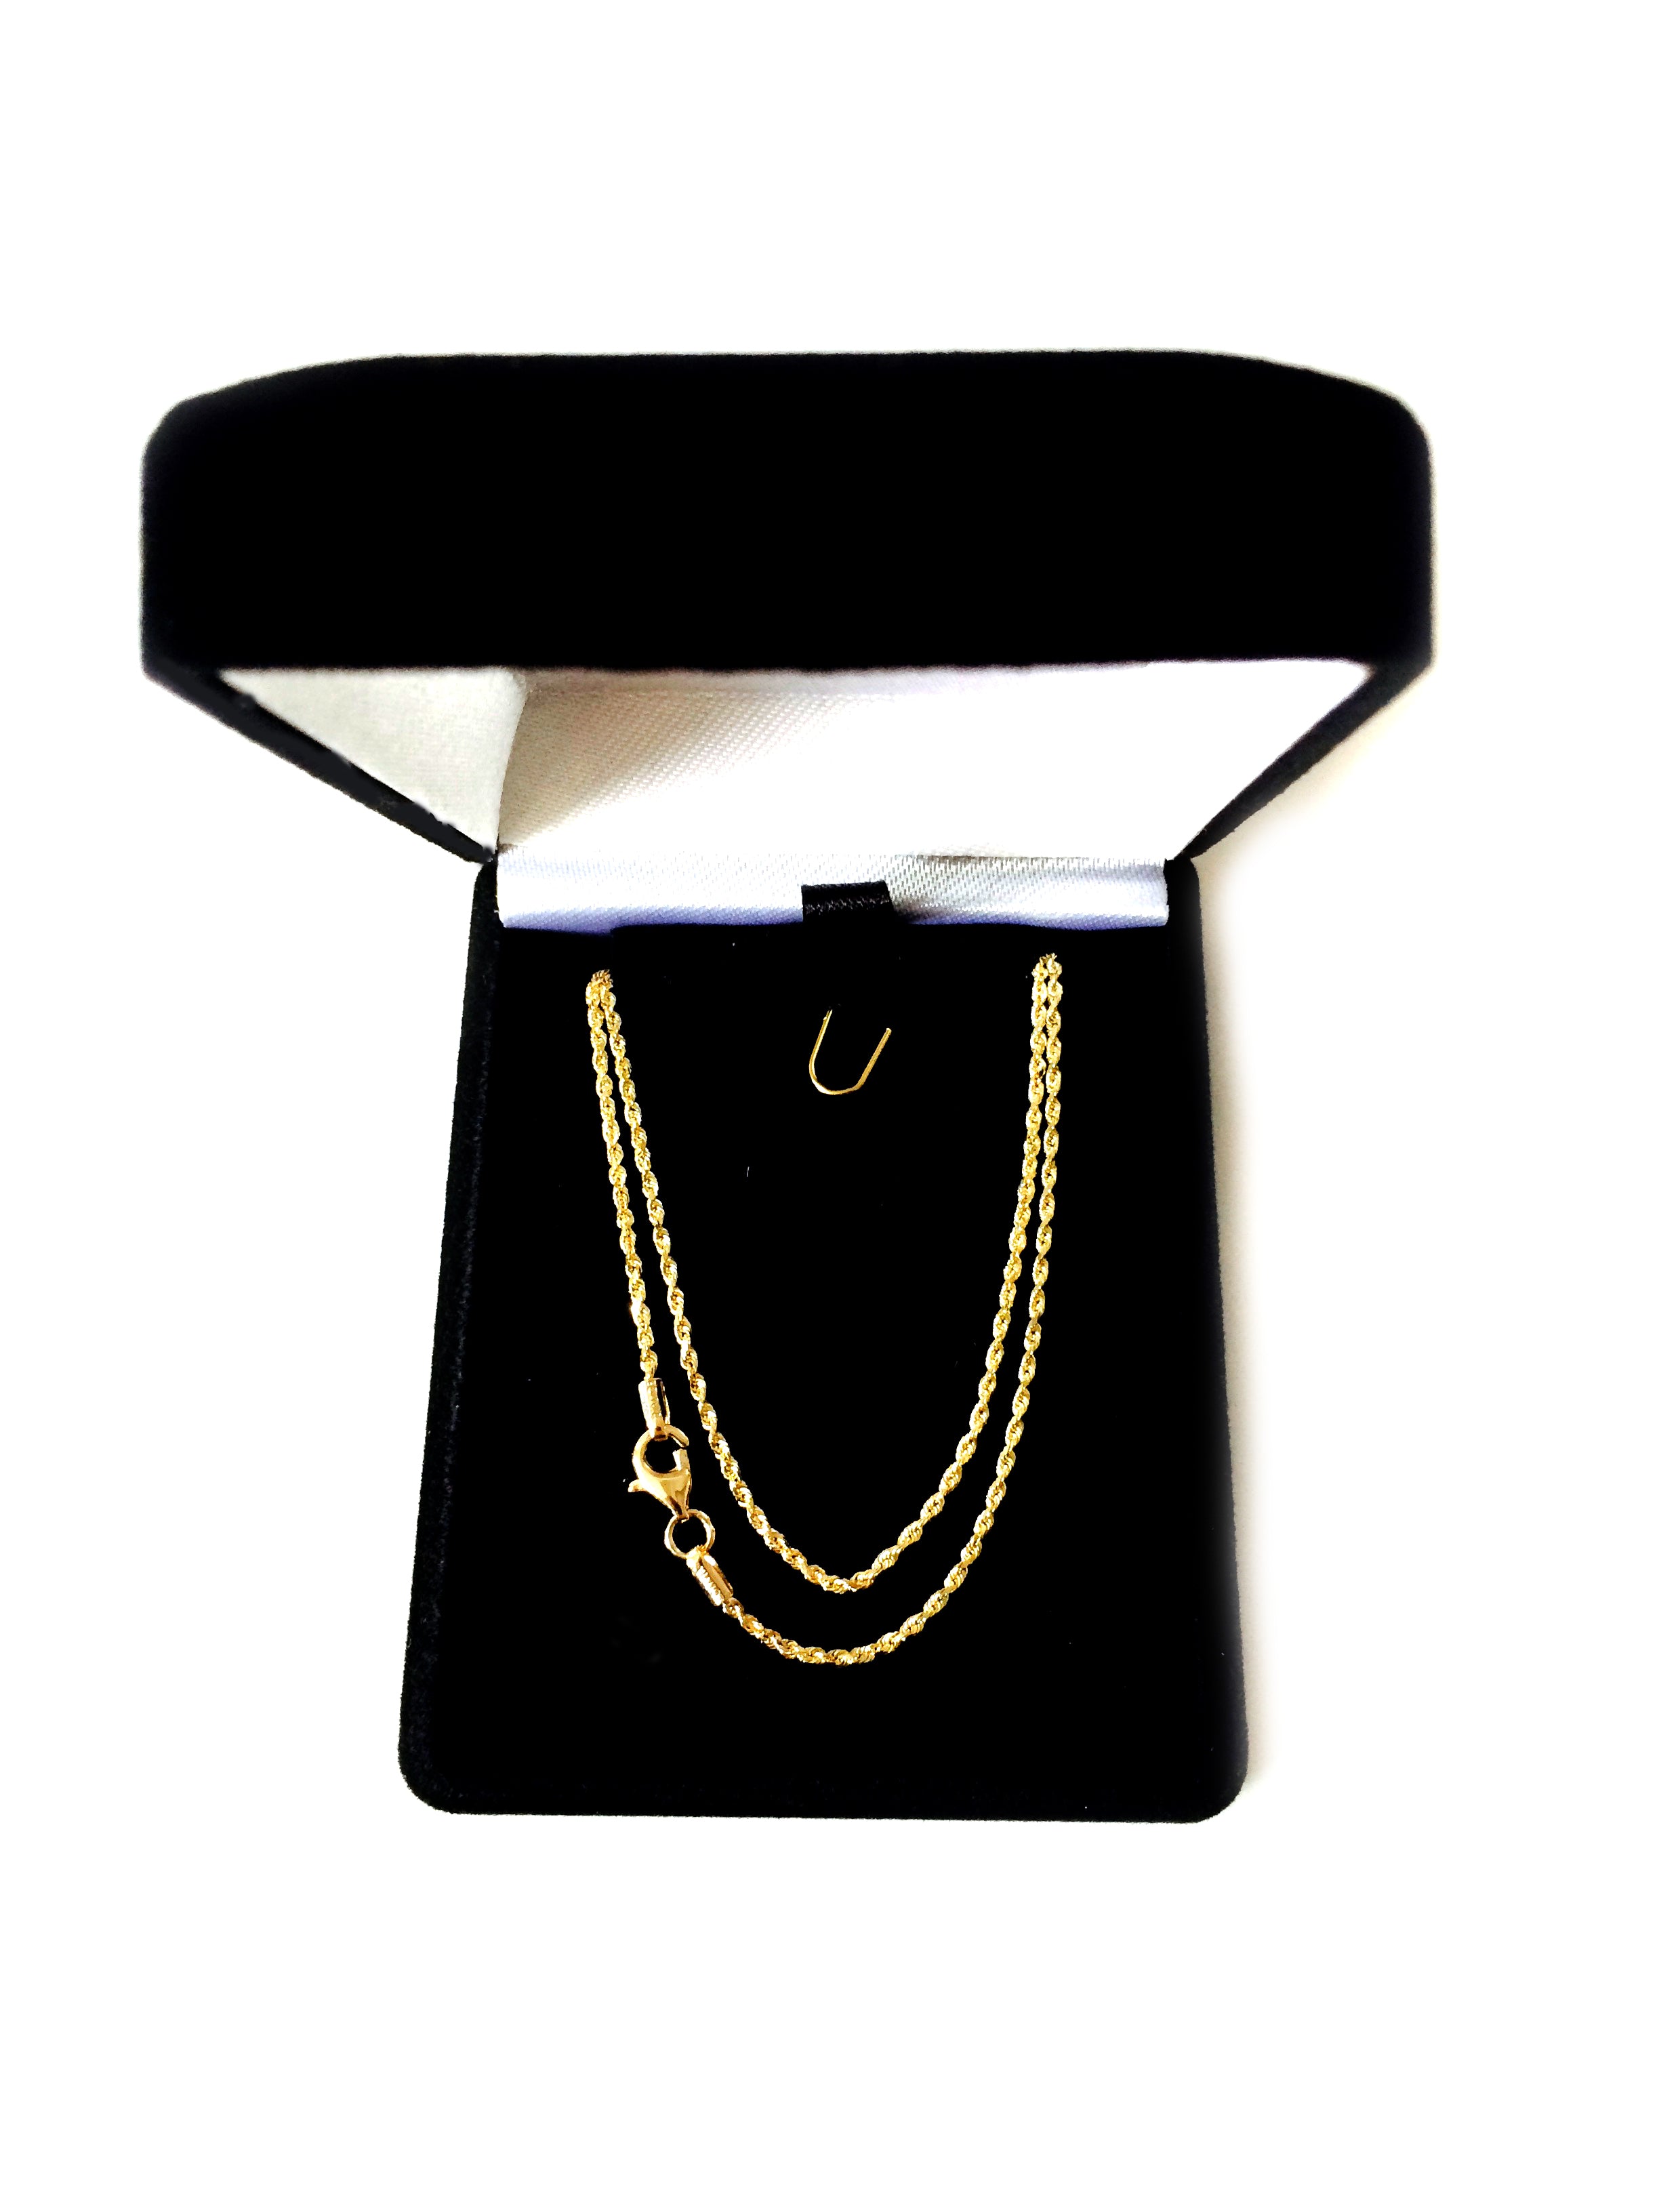 14k Yellow Solid Gold Diamond Cut Rope Chain Necklace , 1.25mm fine designer jewelry for men and women